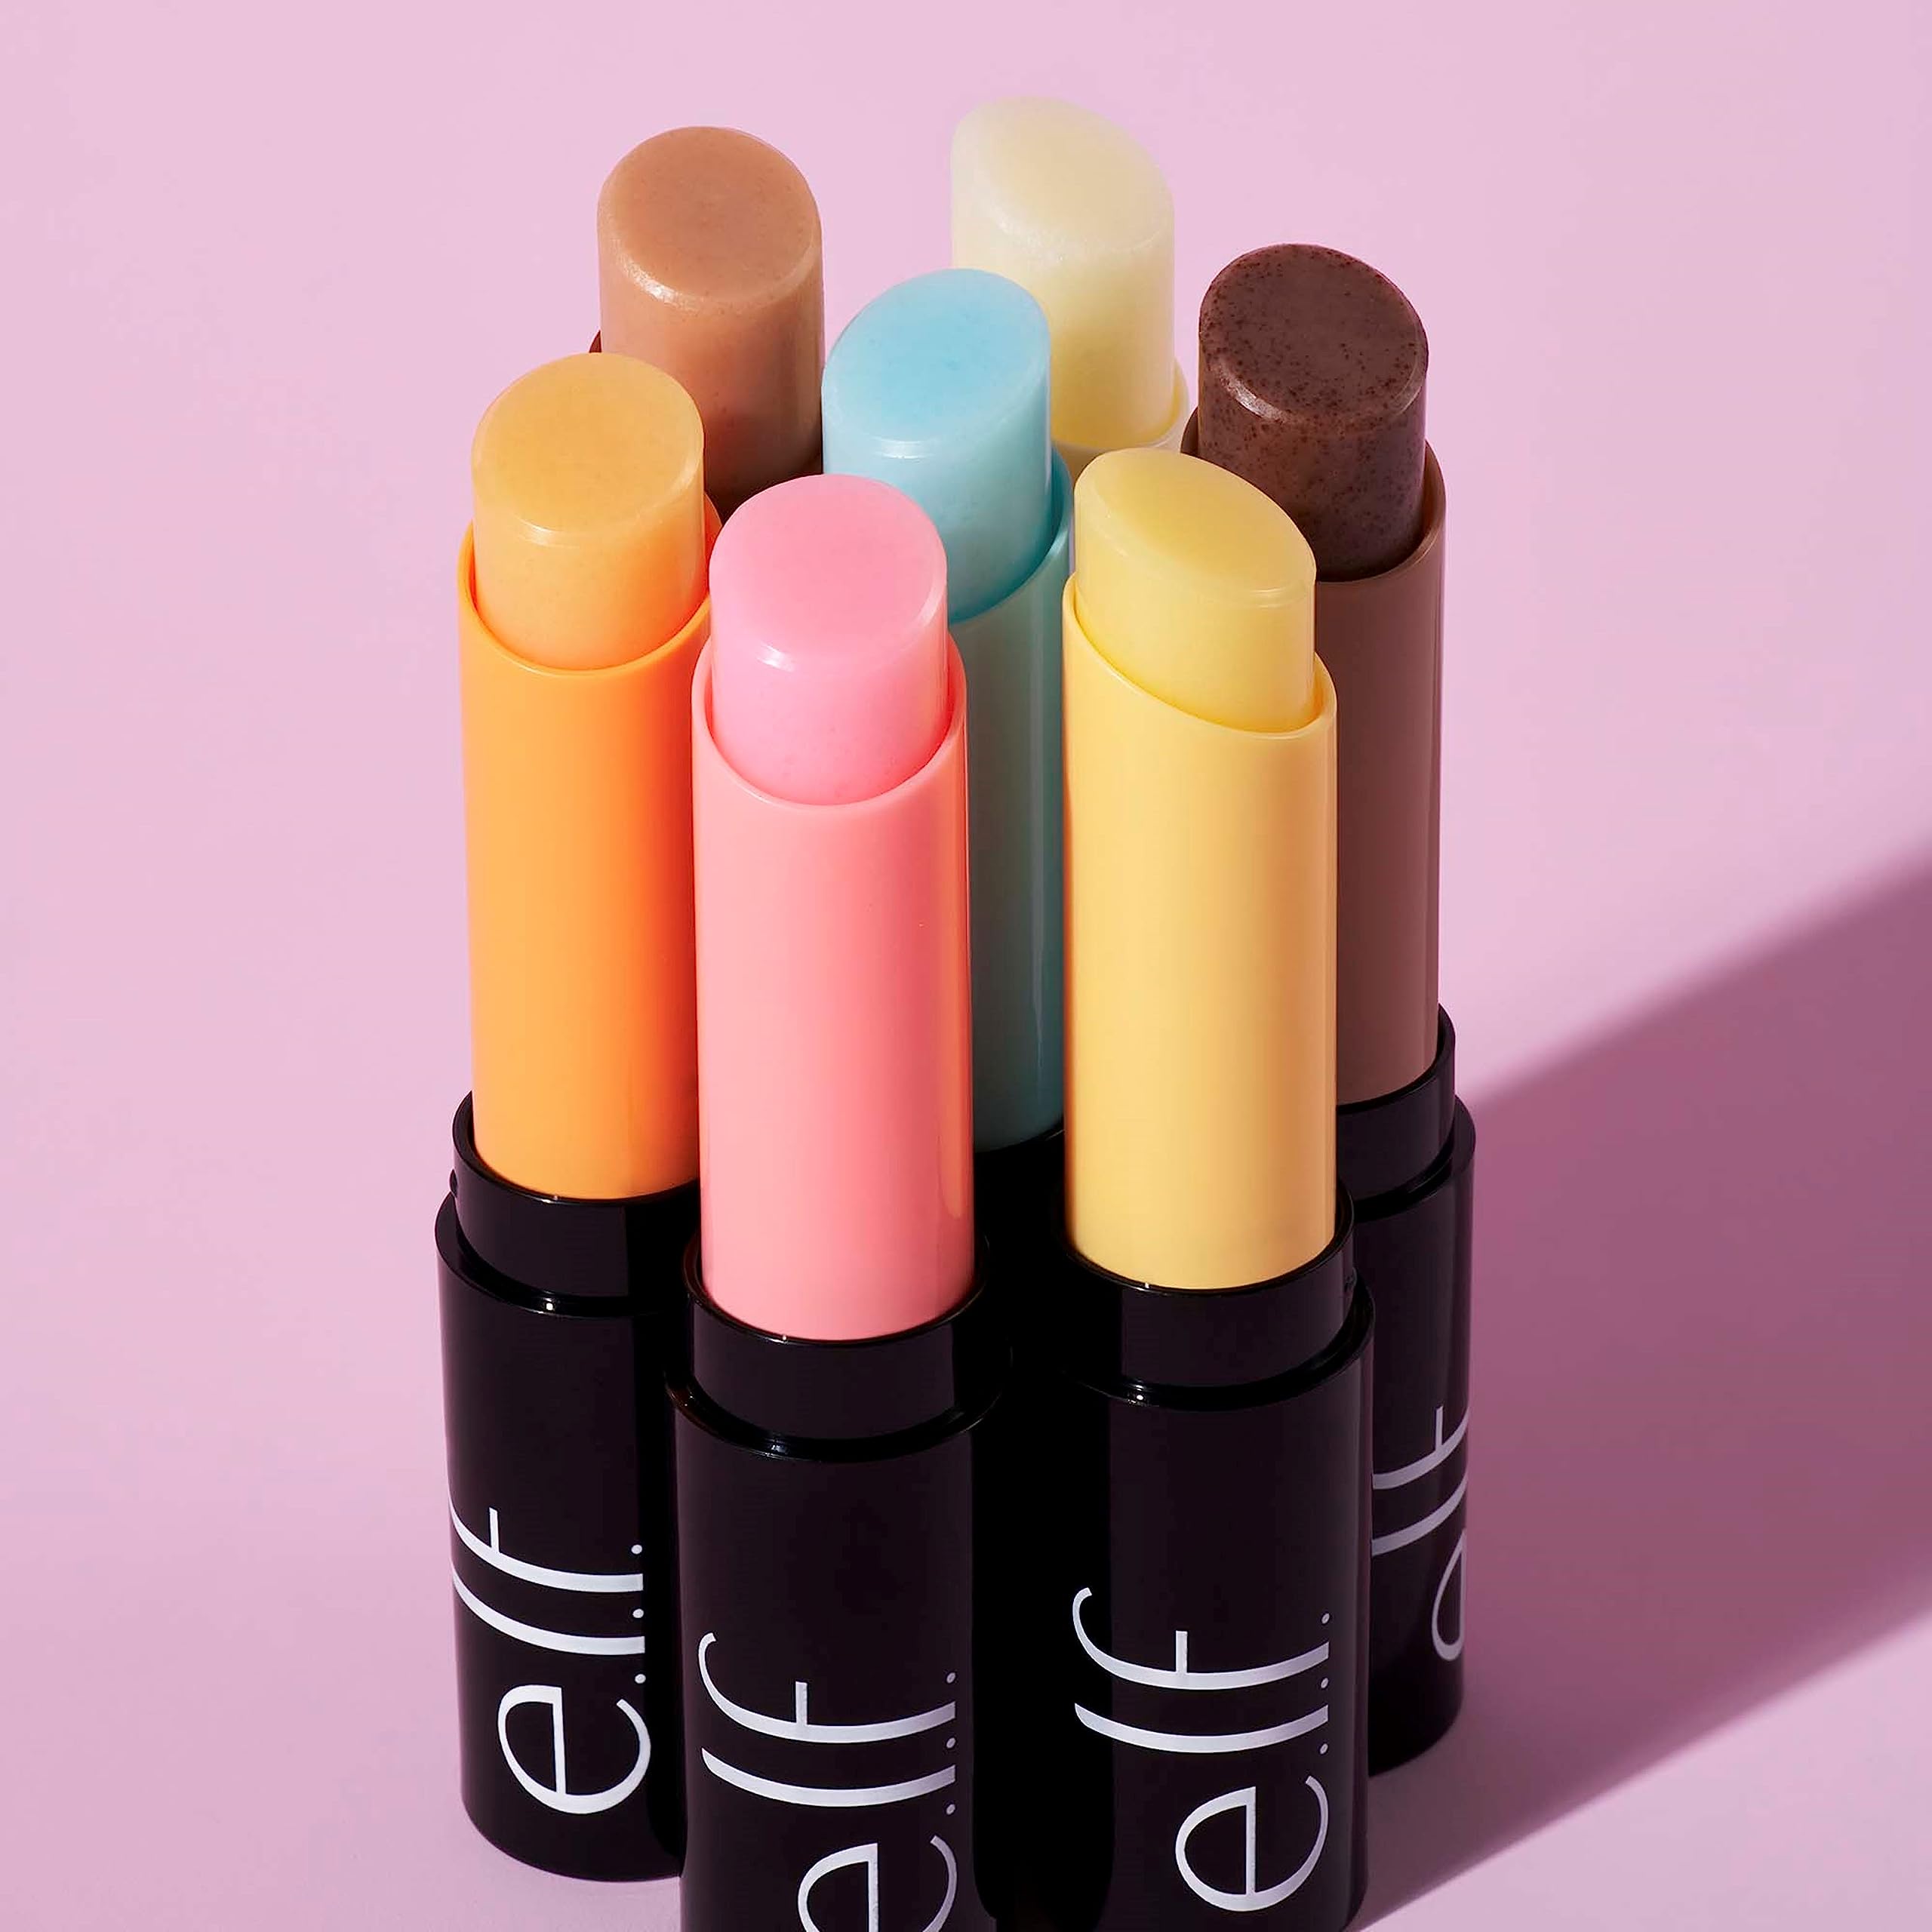 e.l.f. Lip Exfoliator, Moisturizing Scented Lip Scrub For Exfoliating & Smoothing Lips, Infused With Jojoba Oil, Vegan & Cruelty-free, Cotton Candy